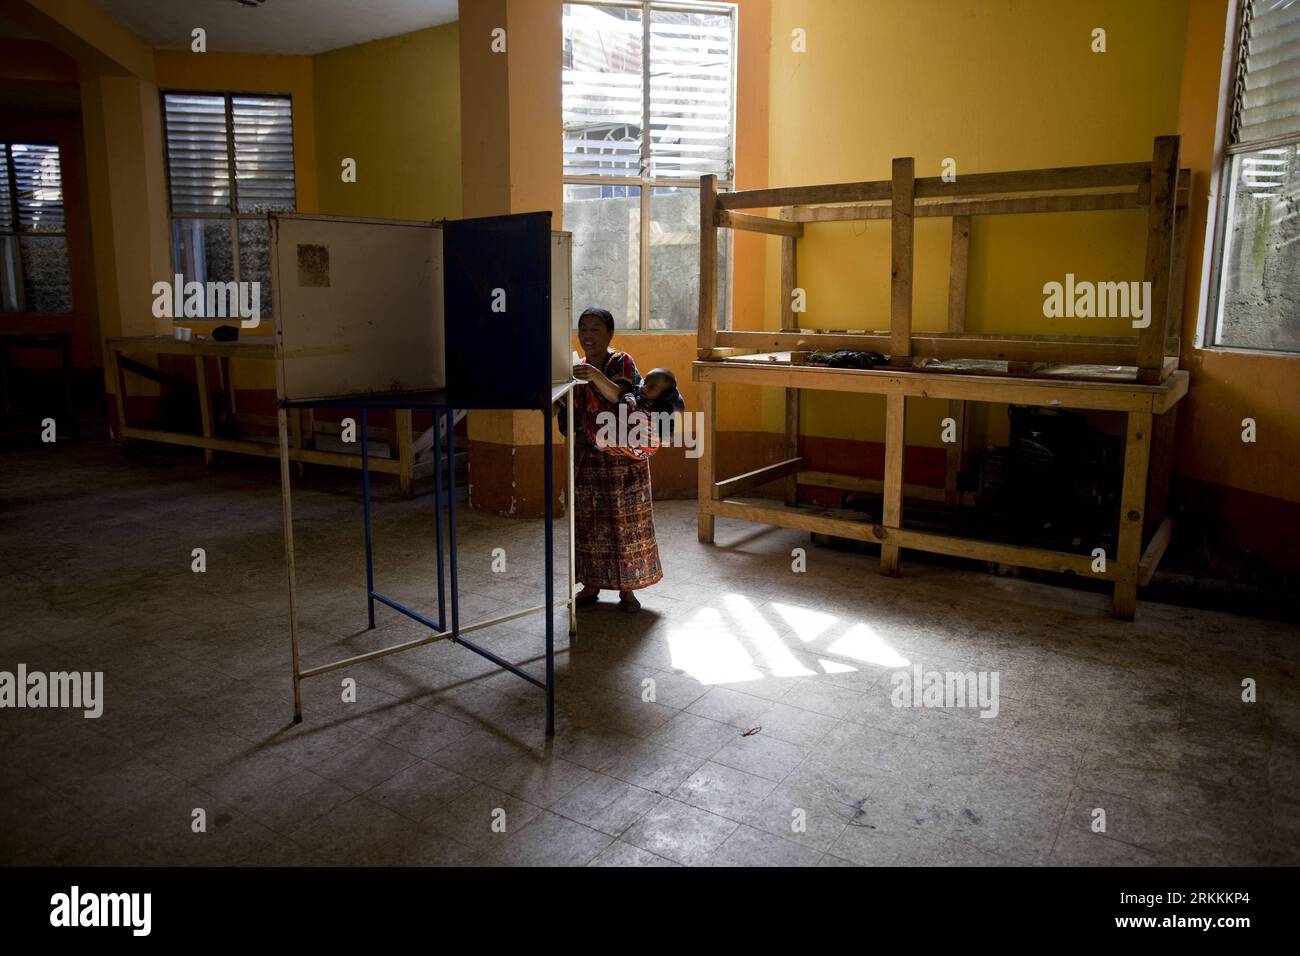 Bildnummer: 56254701  Datum: 06.11.2011  Copyright: imago/Xinhua (111107) -- SAN JUAN COMALAPA, Nov. 7, 2011 (Xinhua) -- A woman casts her vote at a polling station in the province of San Juan Comalapa, in Guatemala, on Nov. 6, 2011. Guatemalans started streaming into polling stations Sunday morning to vote in their country s presidential run-off. More than 2,500 polling stations across the Central American country opened their doors at 7 a.m. (1300 GMT) for the election, a follow-up to the first round in September. (Xinhua/Guillermo Arias) (py) (srb) GUATEMALA-SAN JUAN COMALAPA-PESIDENTIAL EL Stock Photo